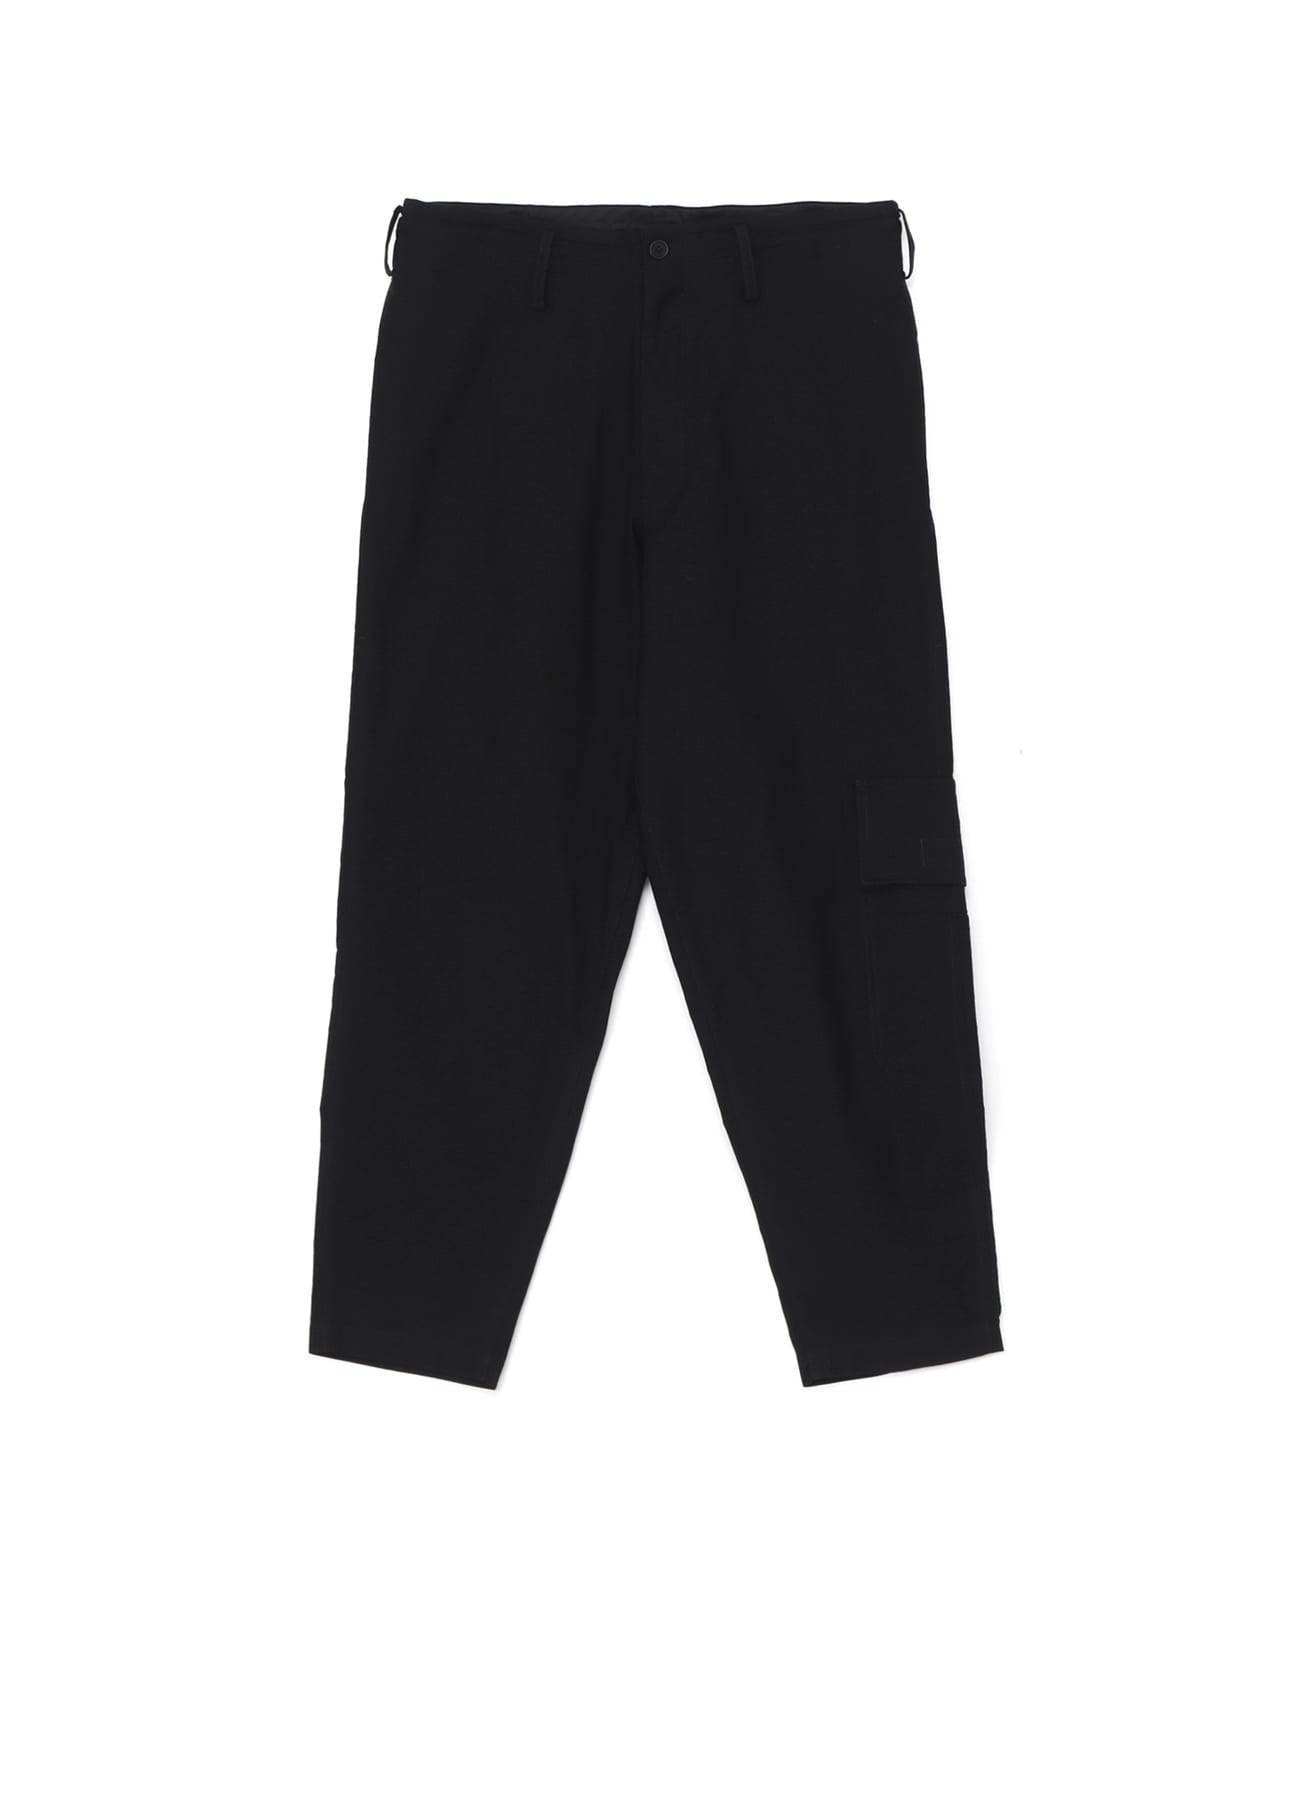 WIDE TWILL G-SIDE TUCK P(S Black): Yohji Yamamoto POUR HOMME｜THE 